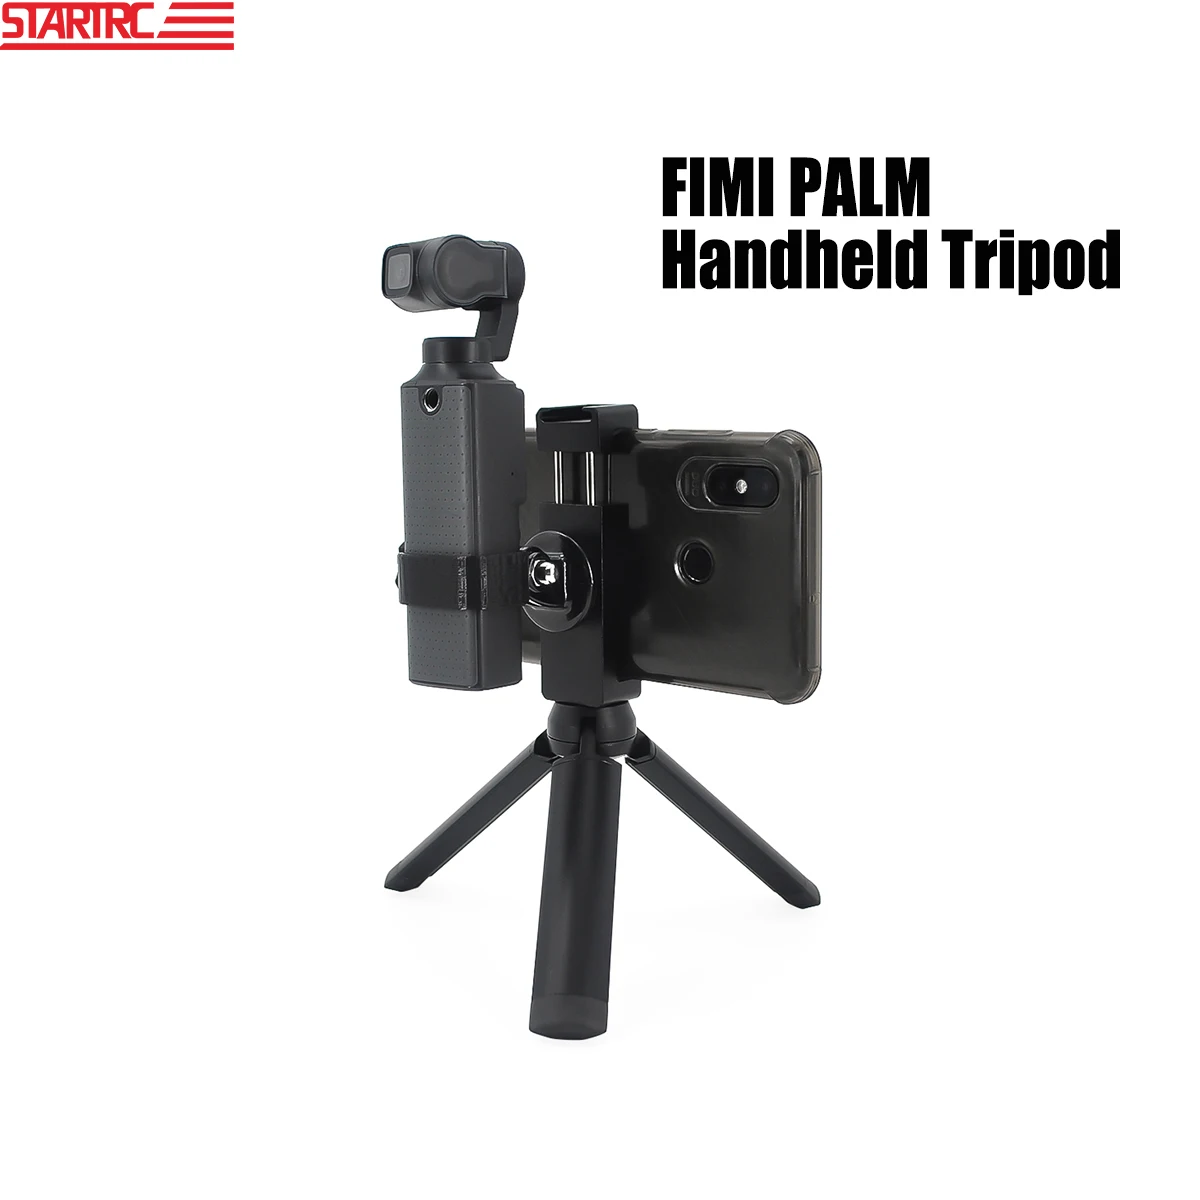 

STARTRC Handheld Tripod With Metal Phone Holder Mount Bracket For FIMI PALM Handheld Gimbal Camera Expansion Accessories